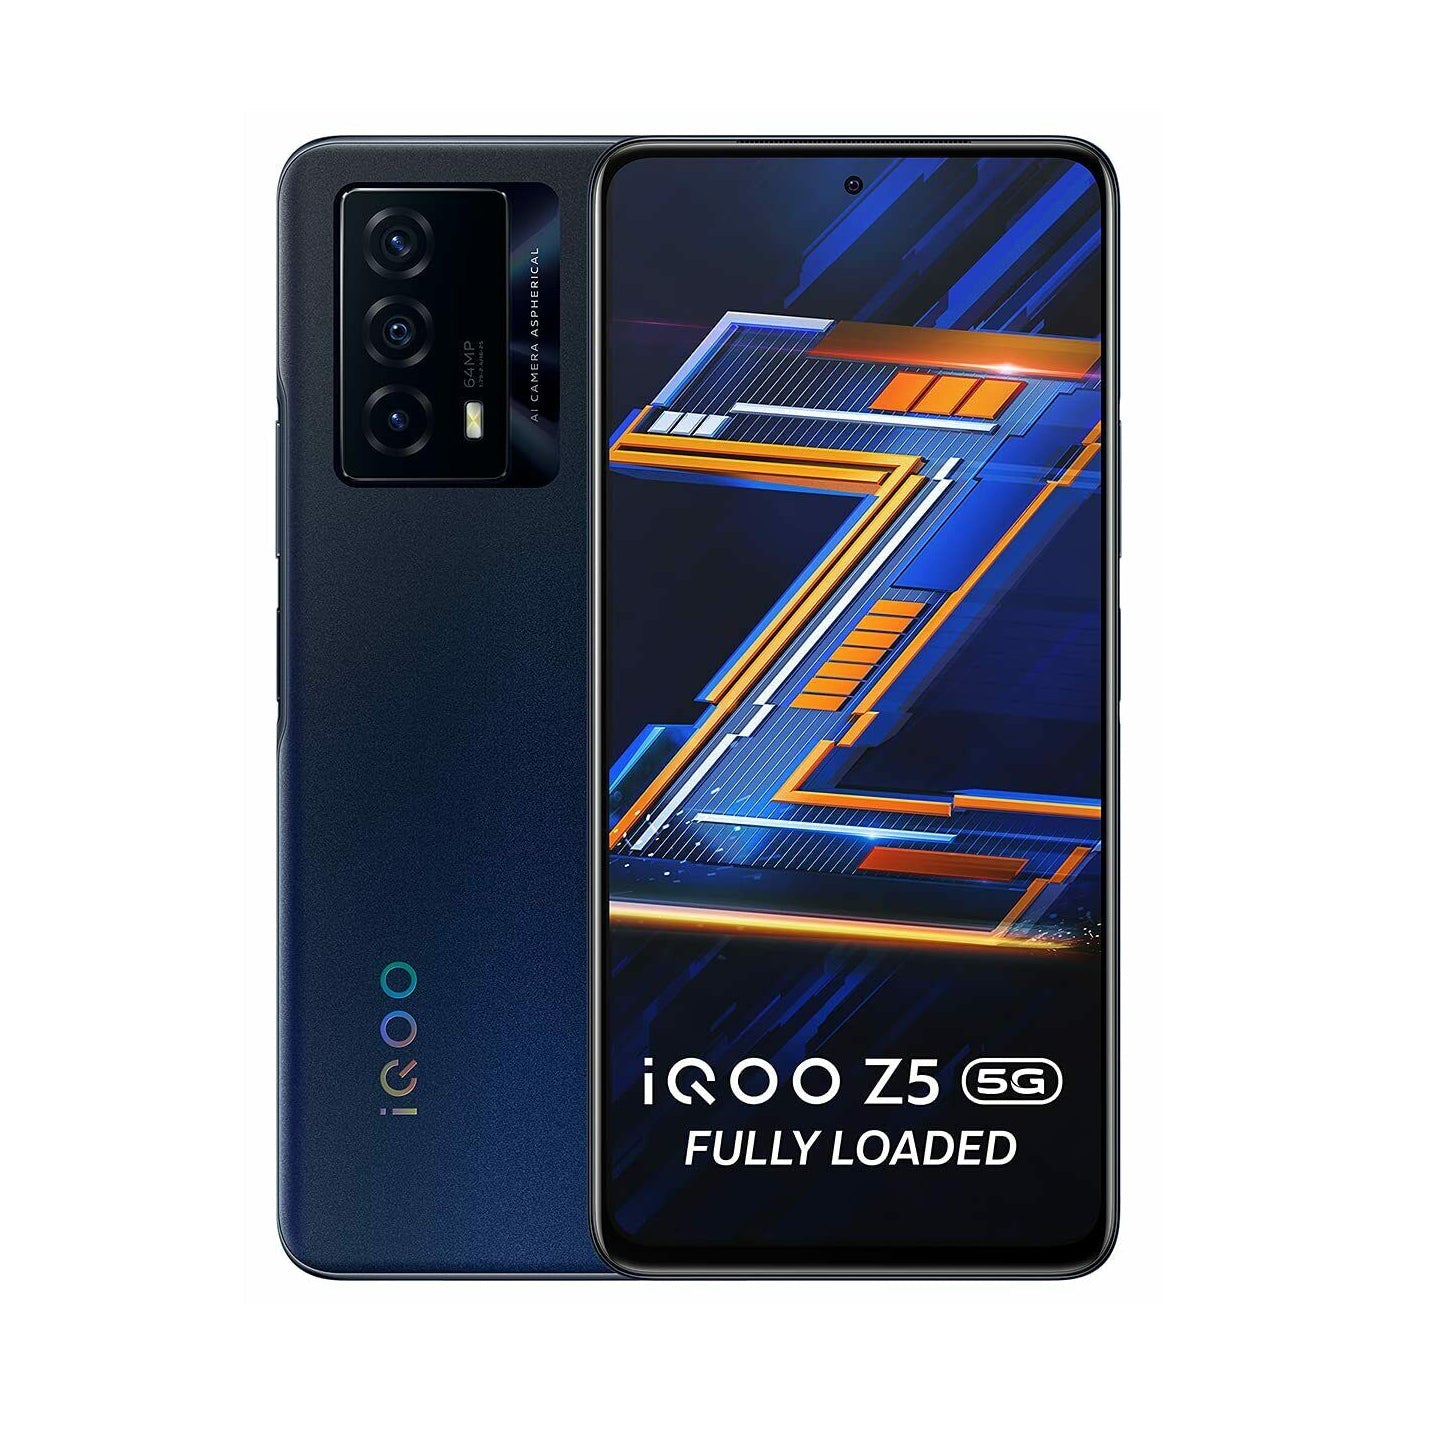 Vivo IQOO Z5 5G Phone with dual gsm unlocked smart phones Android Octa-core beauty camera 44W fast charging baby magazin 